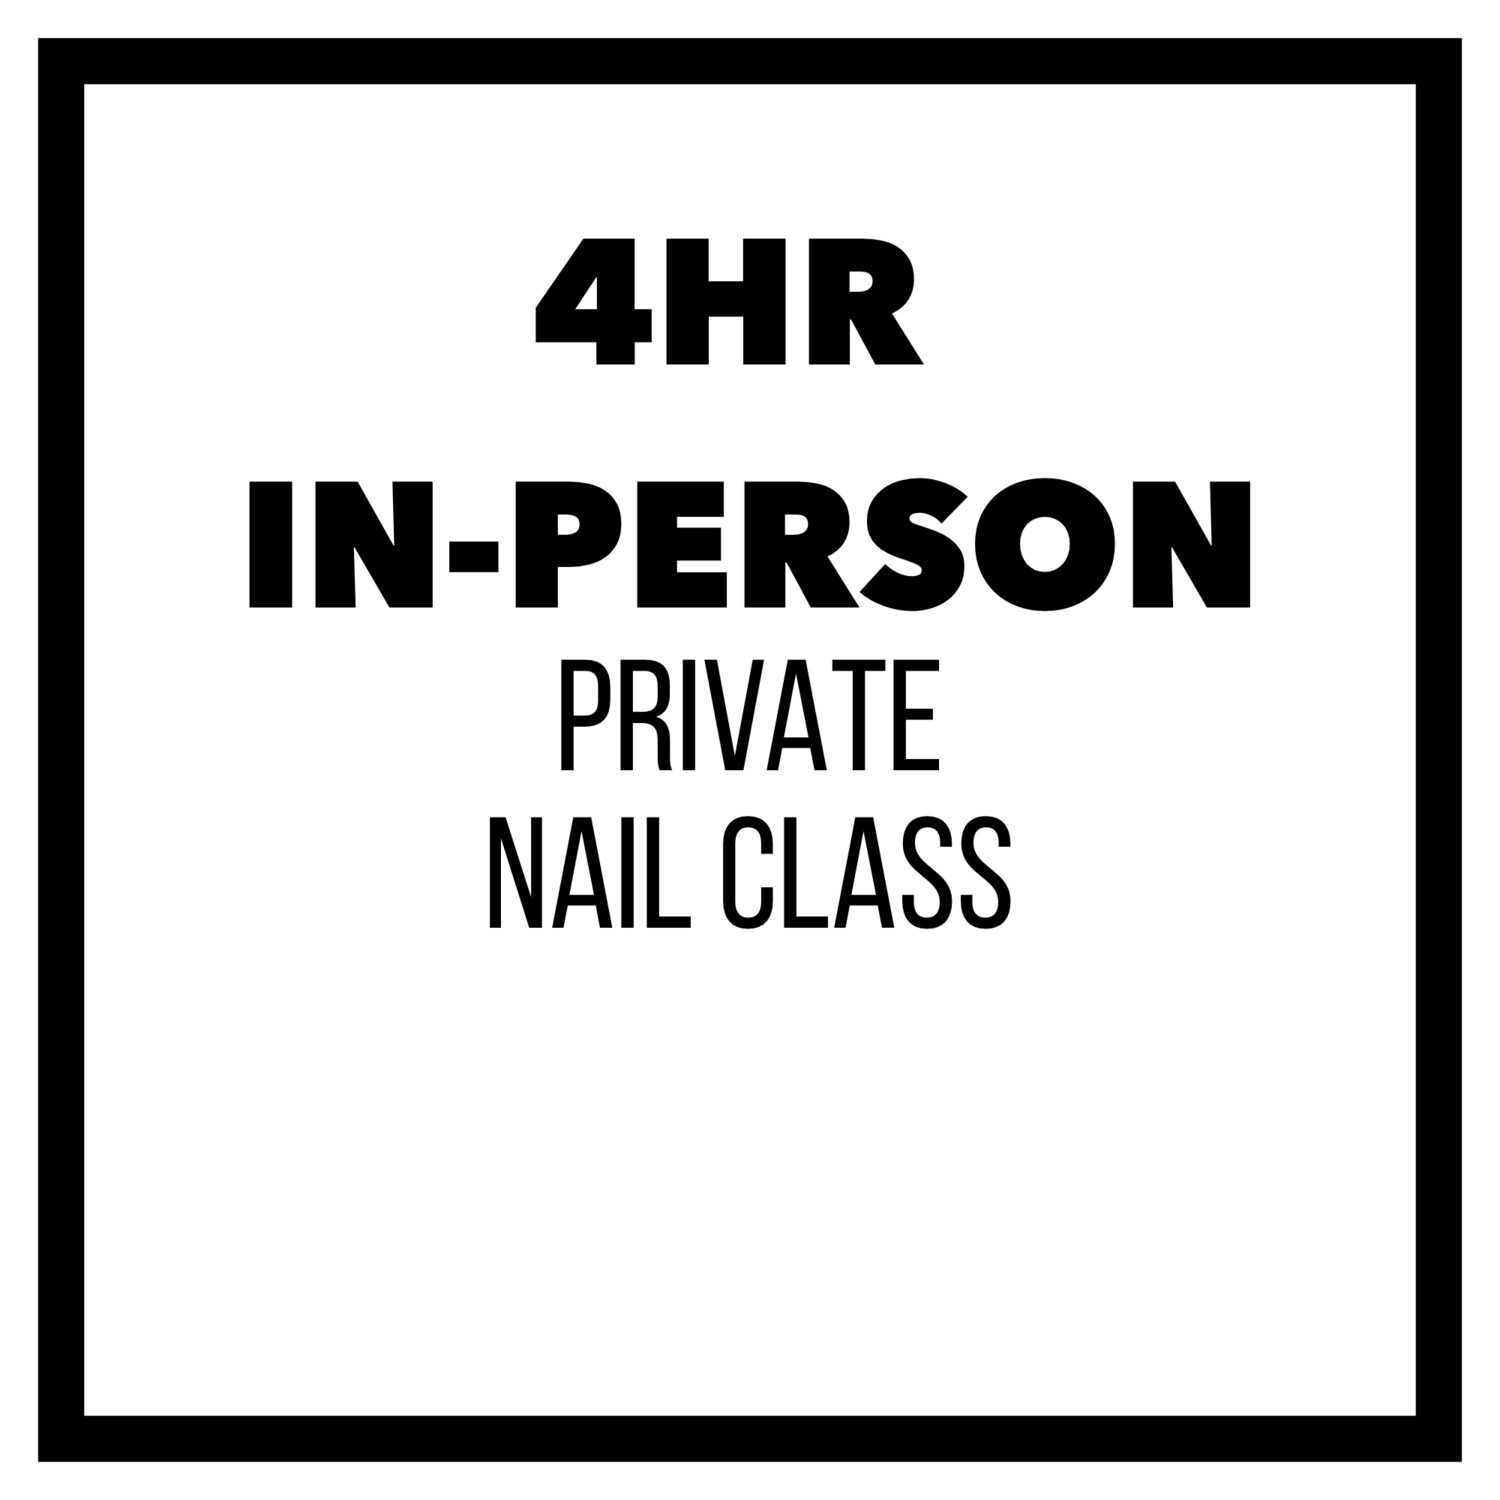 4HR IN-PERSON PRIVATE NAIL CLASS